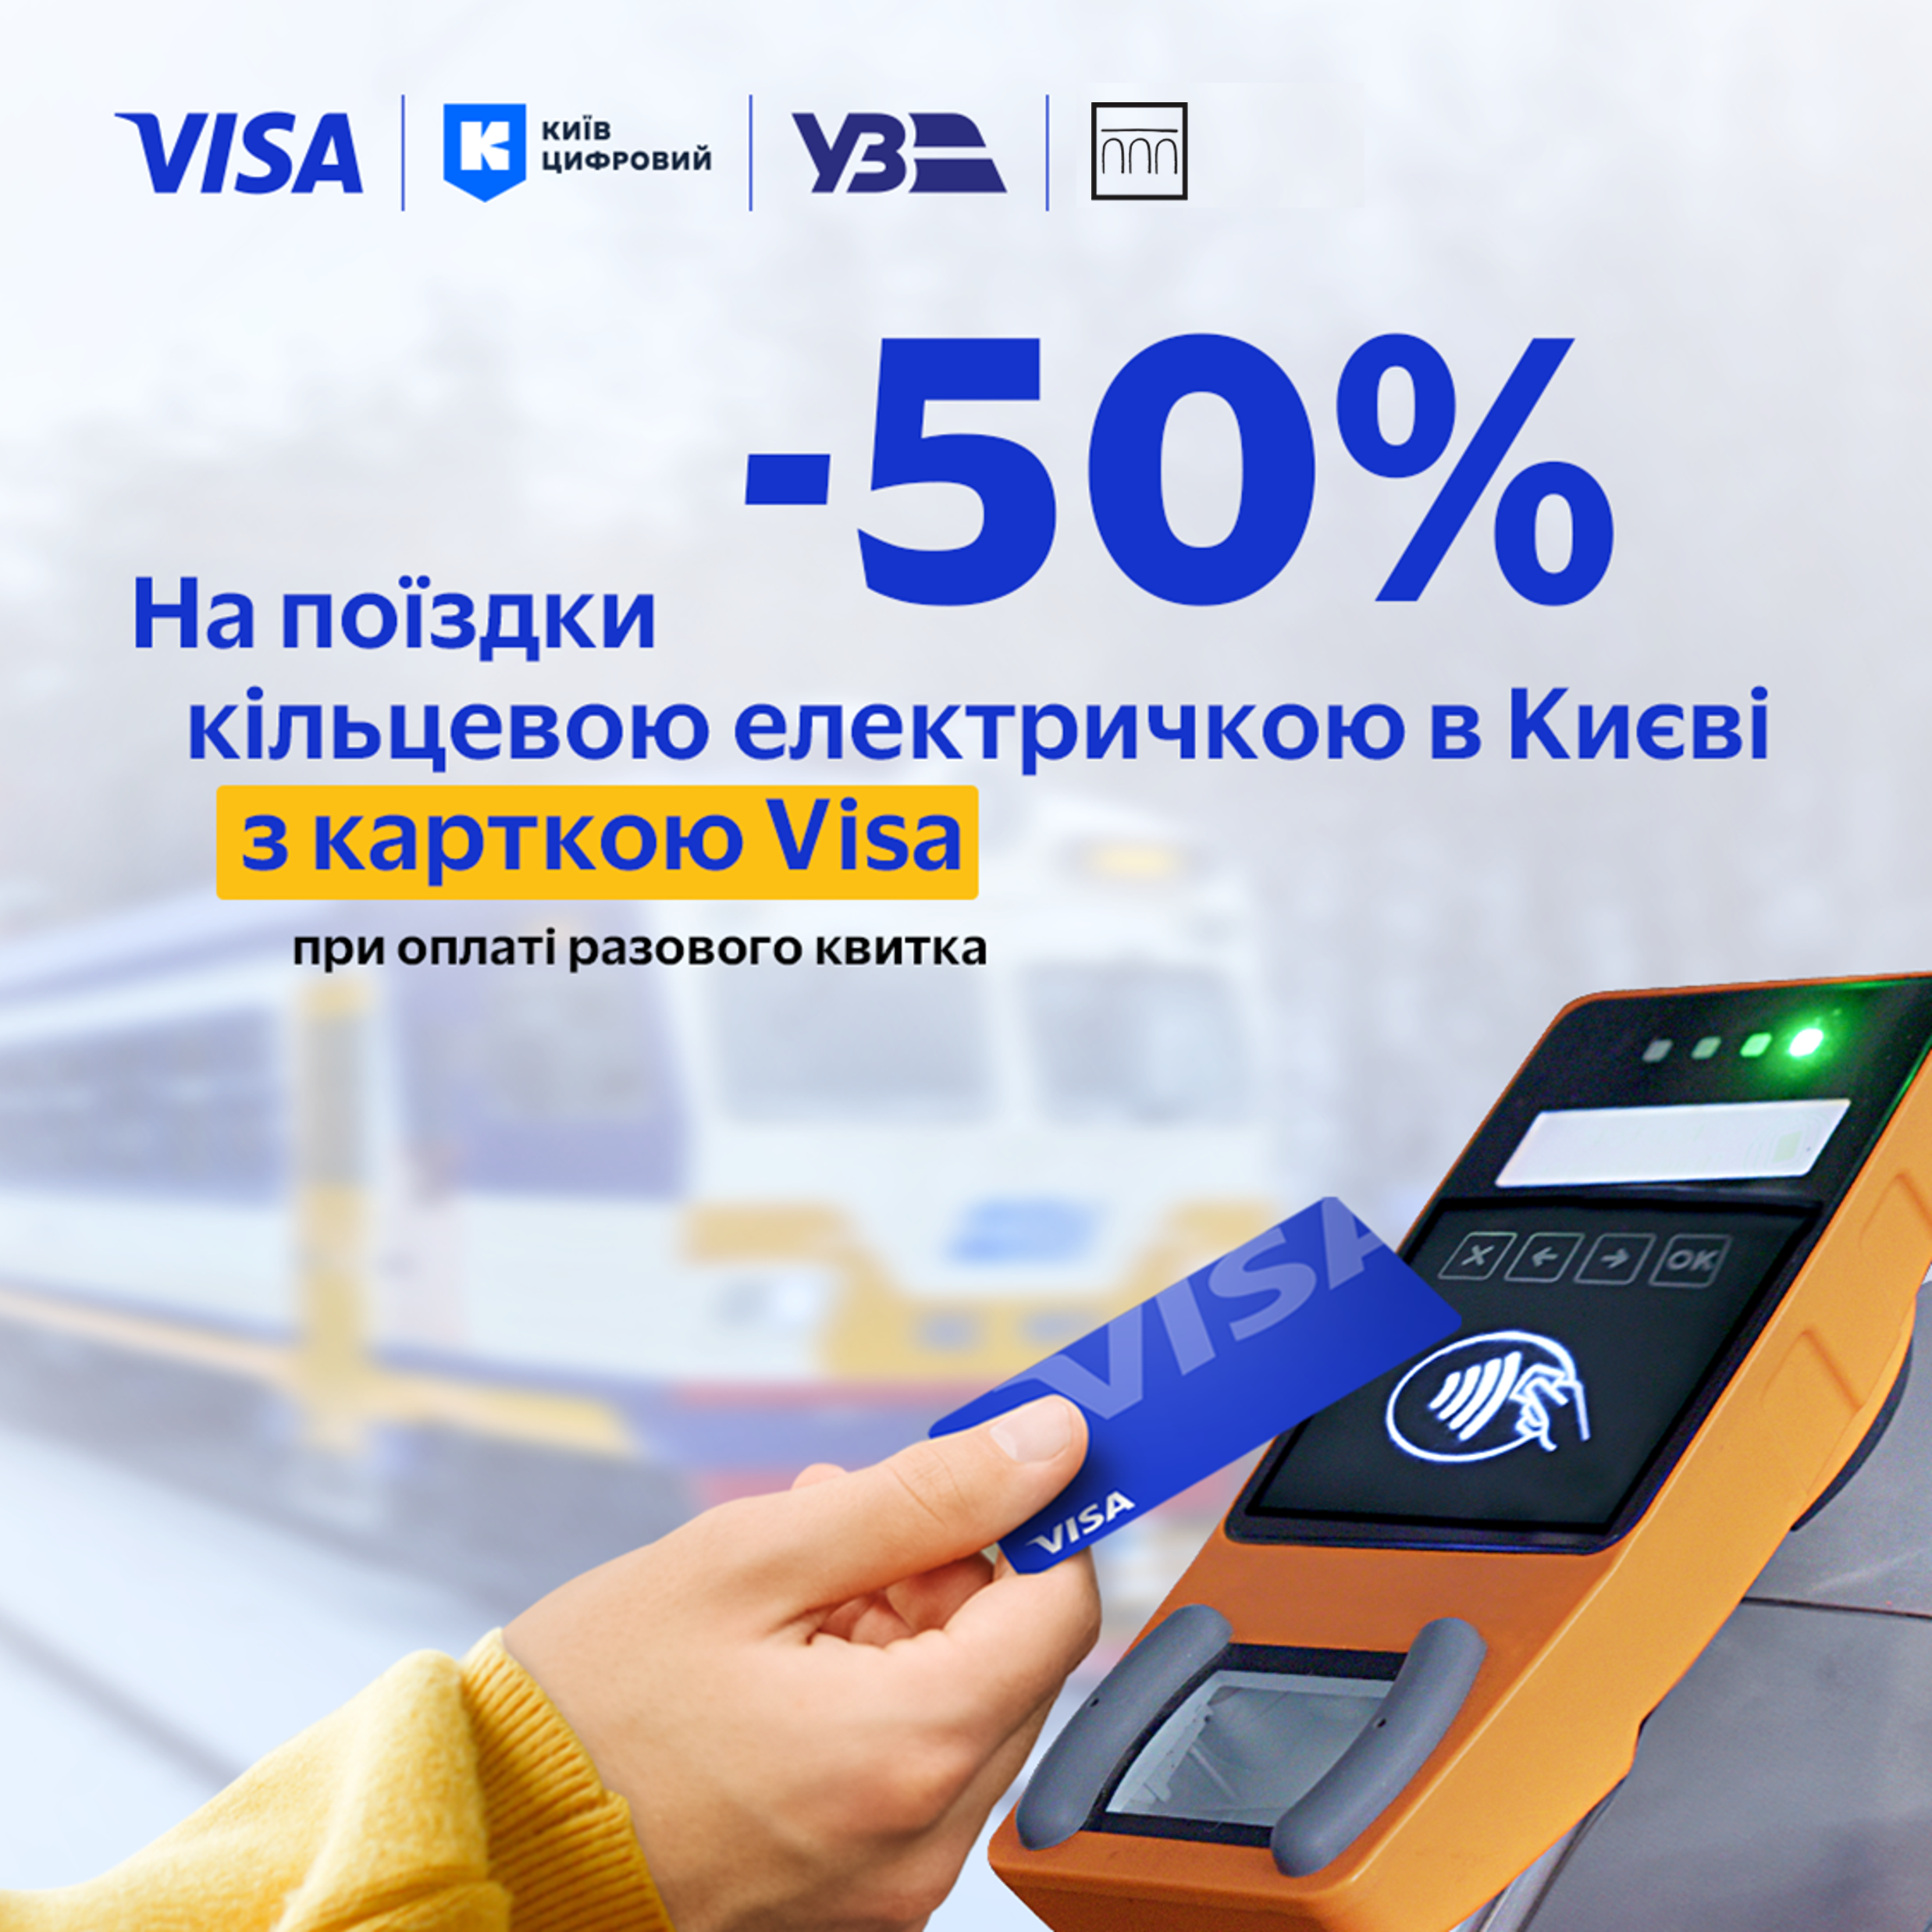 -50% on a one-time ticket on the Kyiv city circular train with Visa